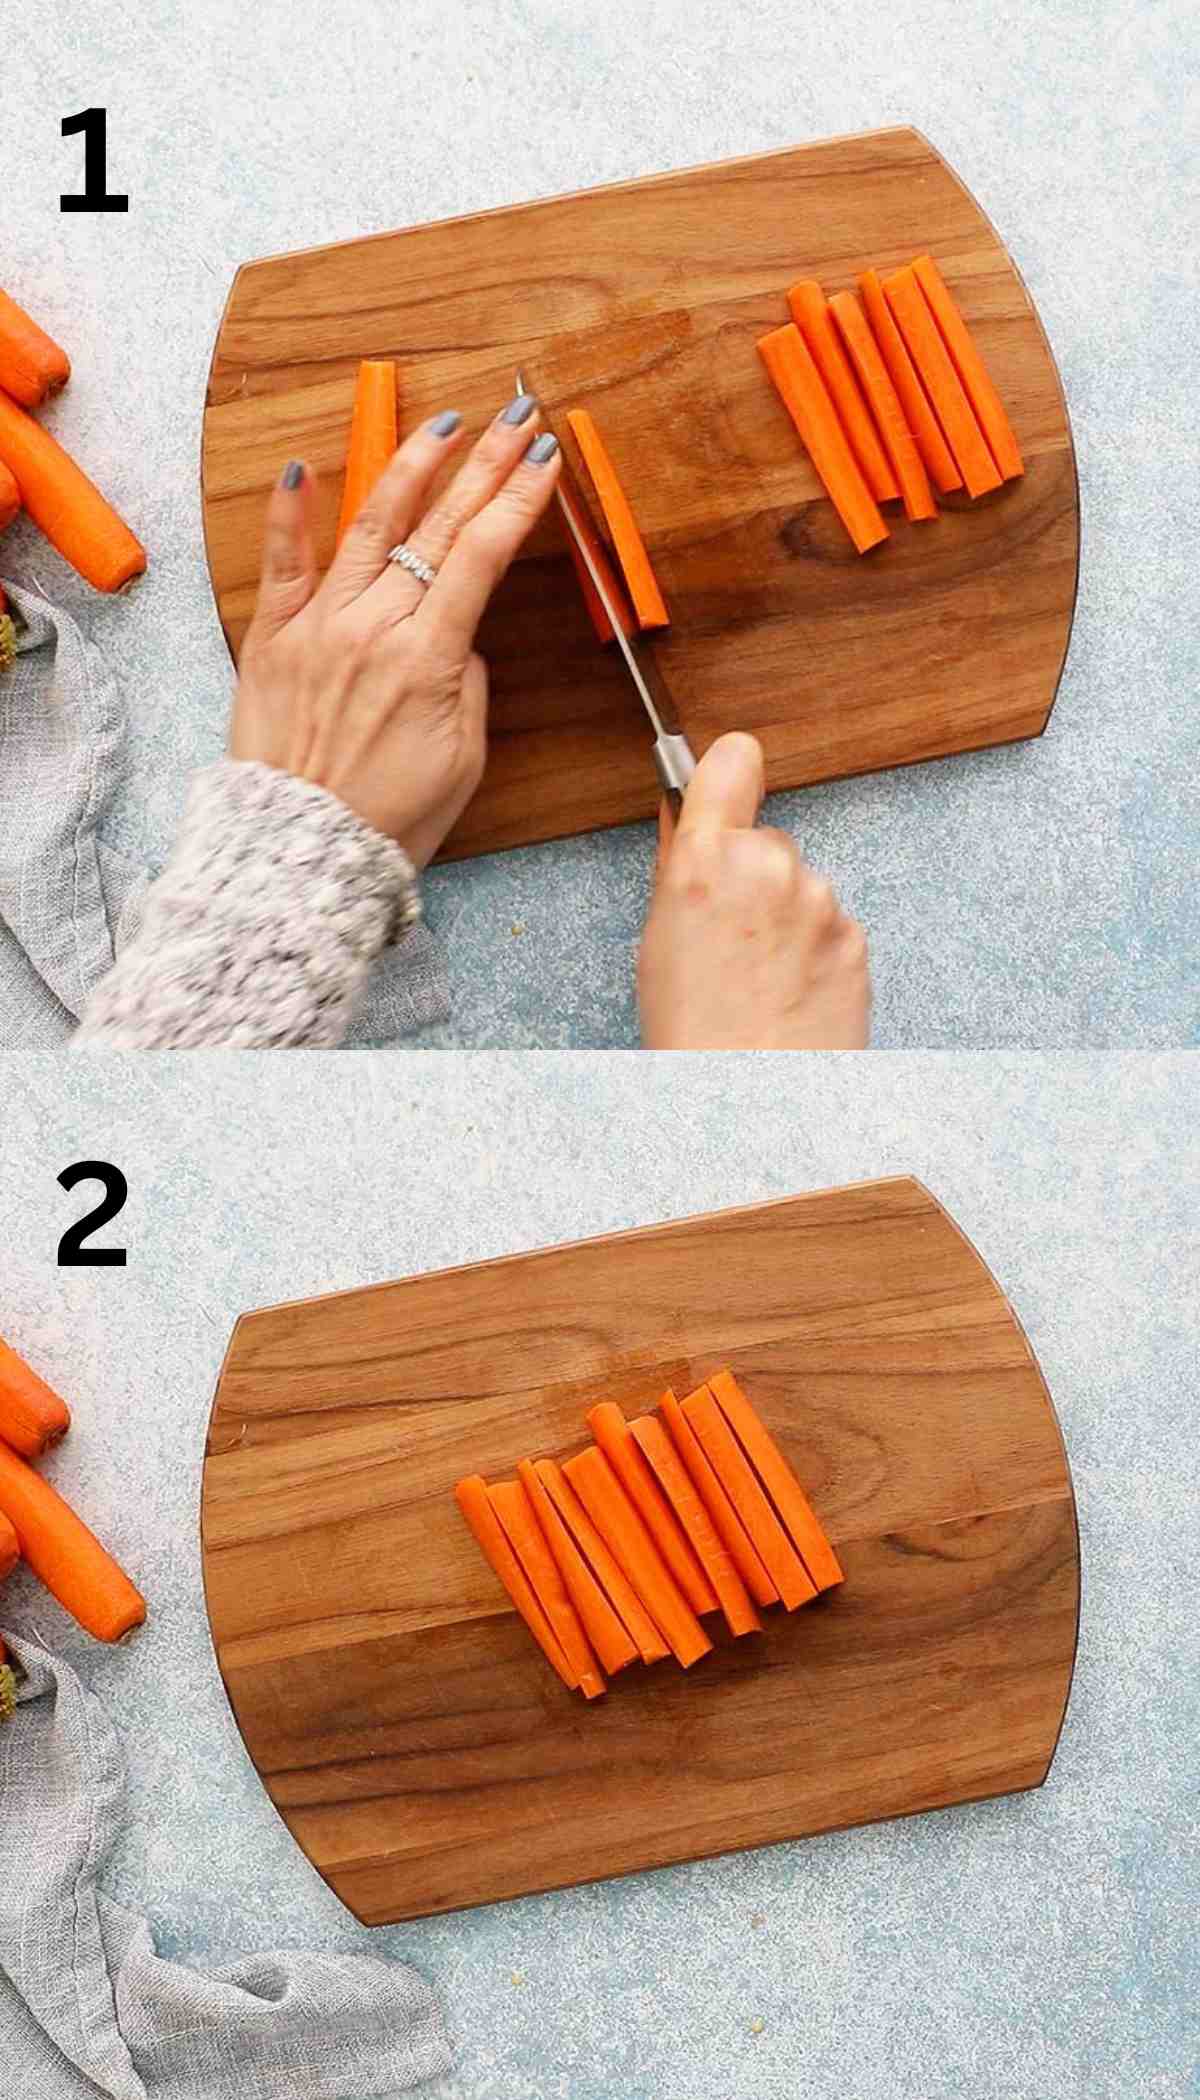 2 photo collage of two hands cutting carrots into sticks on a wooden board.